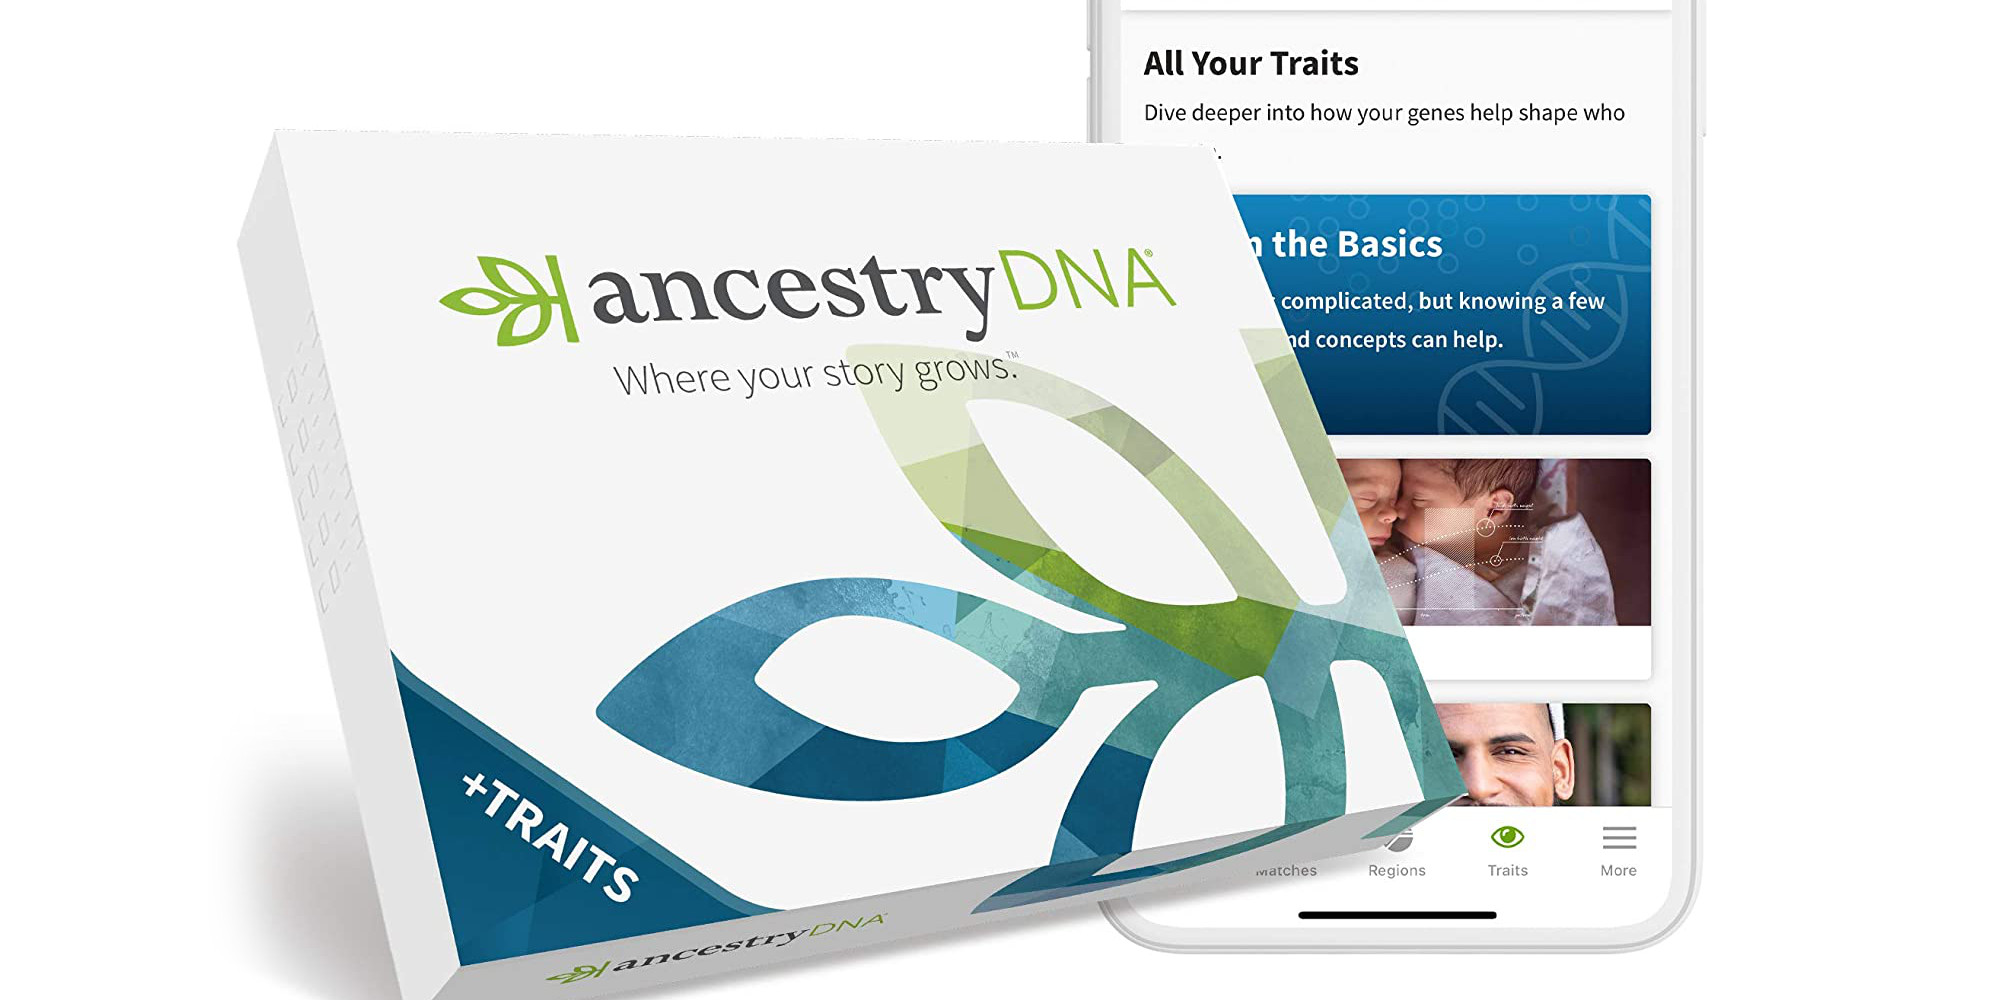 Explore your lineage Prime Day Ancestry DNA, 23andMe, more kits from